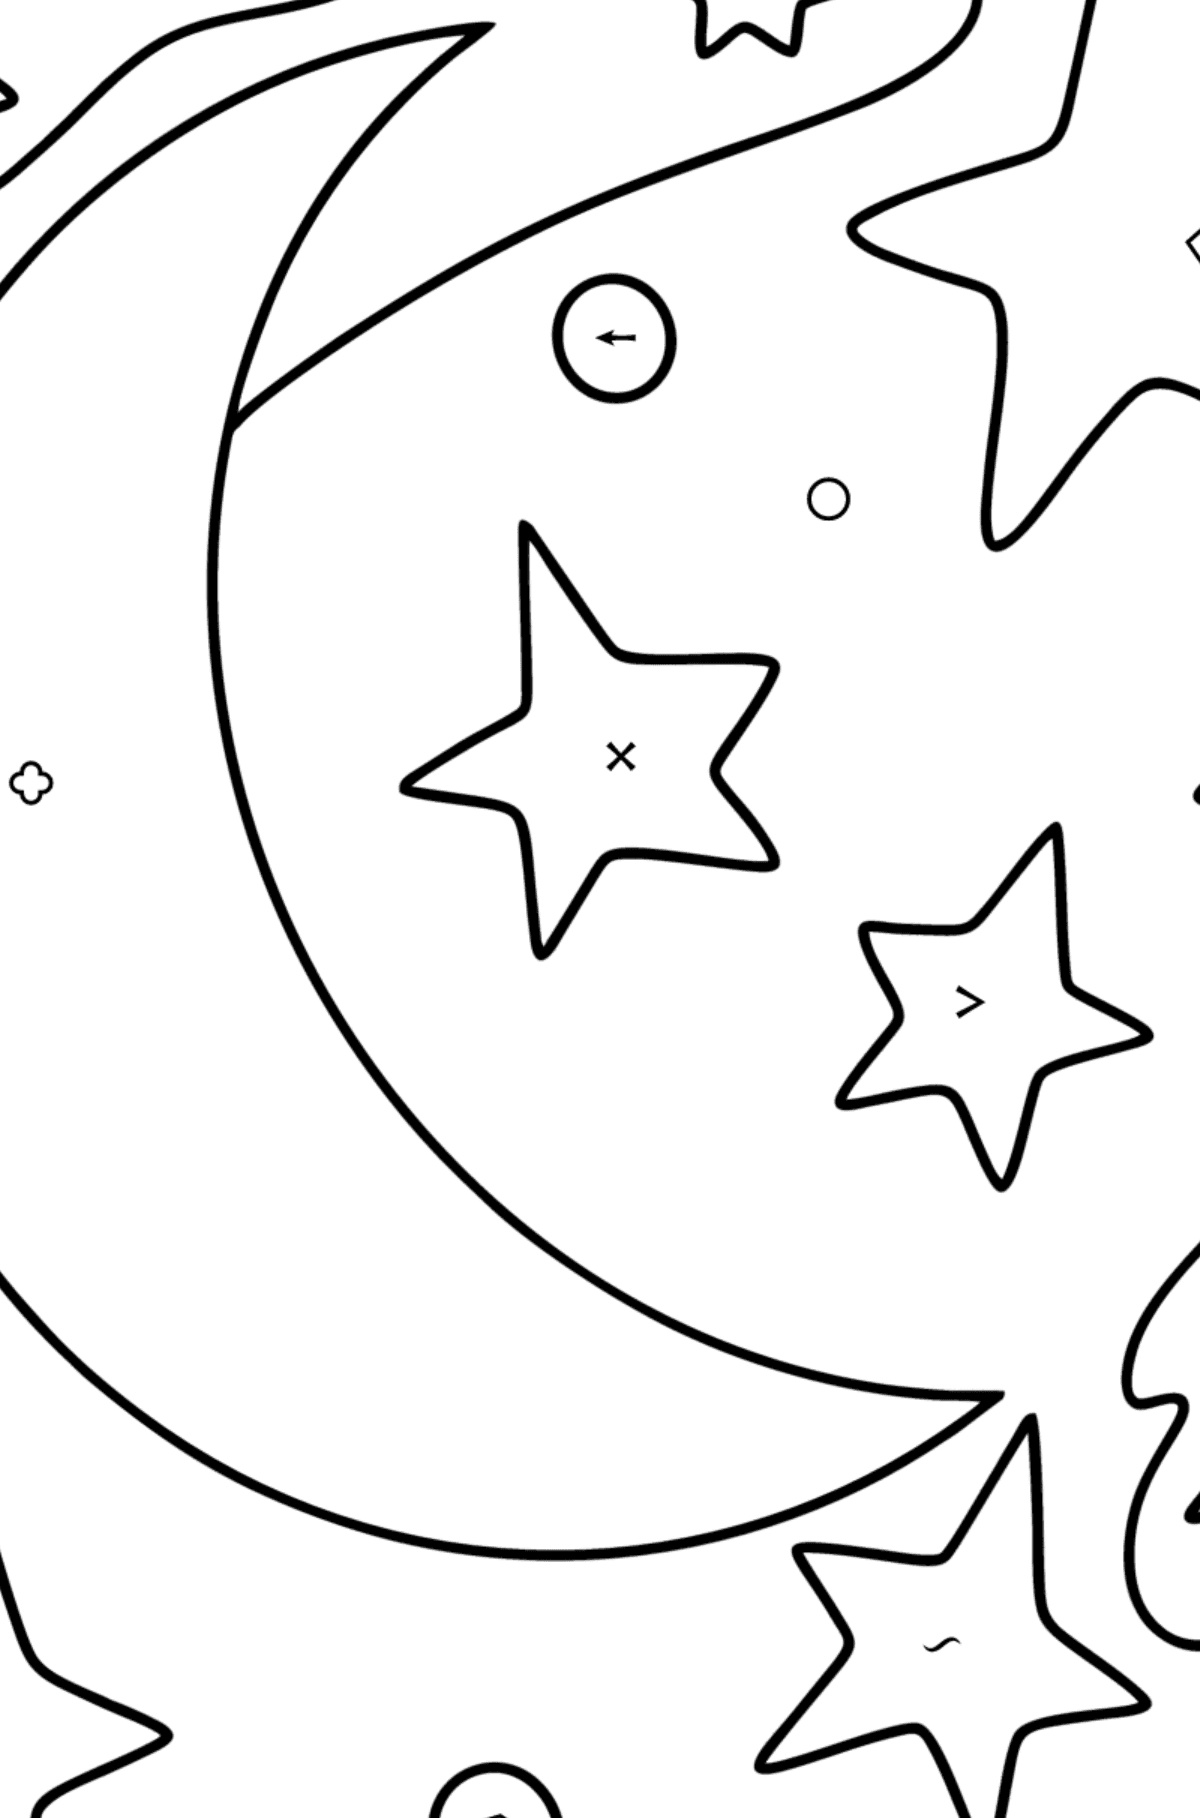 Coloring page moon and stars - Coloring by Symbols and Geometric Shapes for Kids